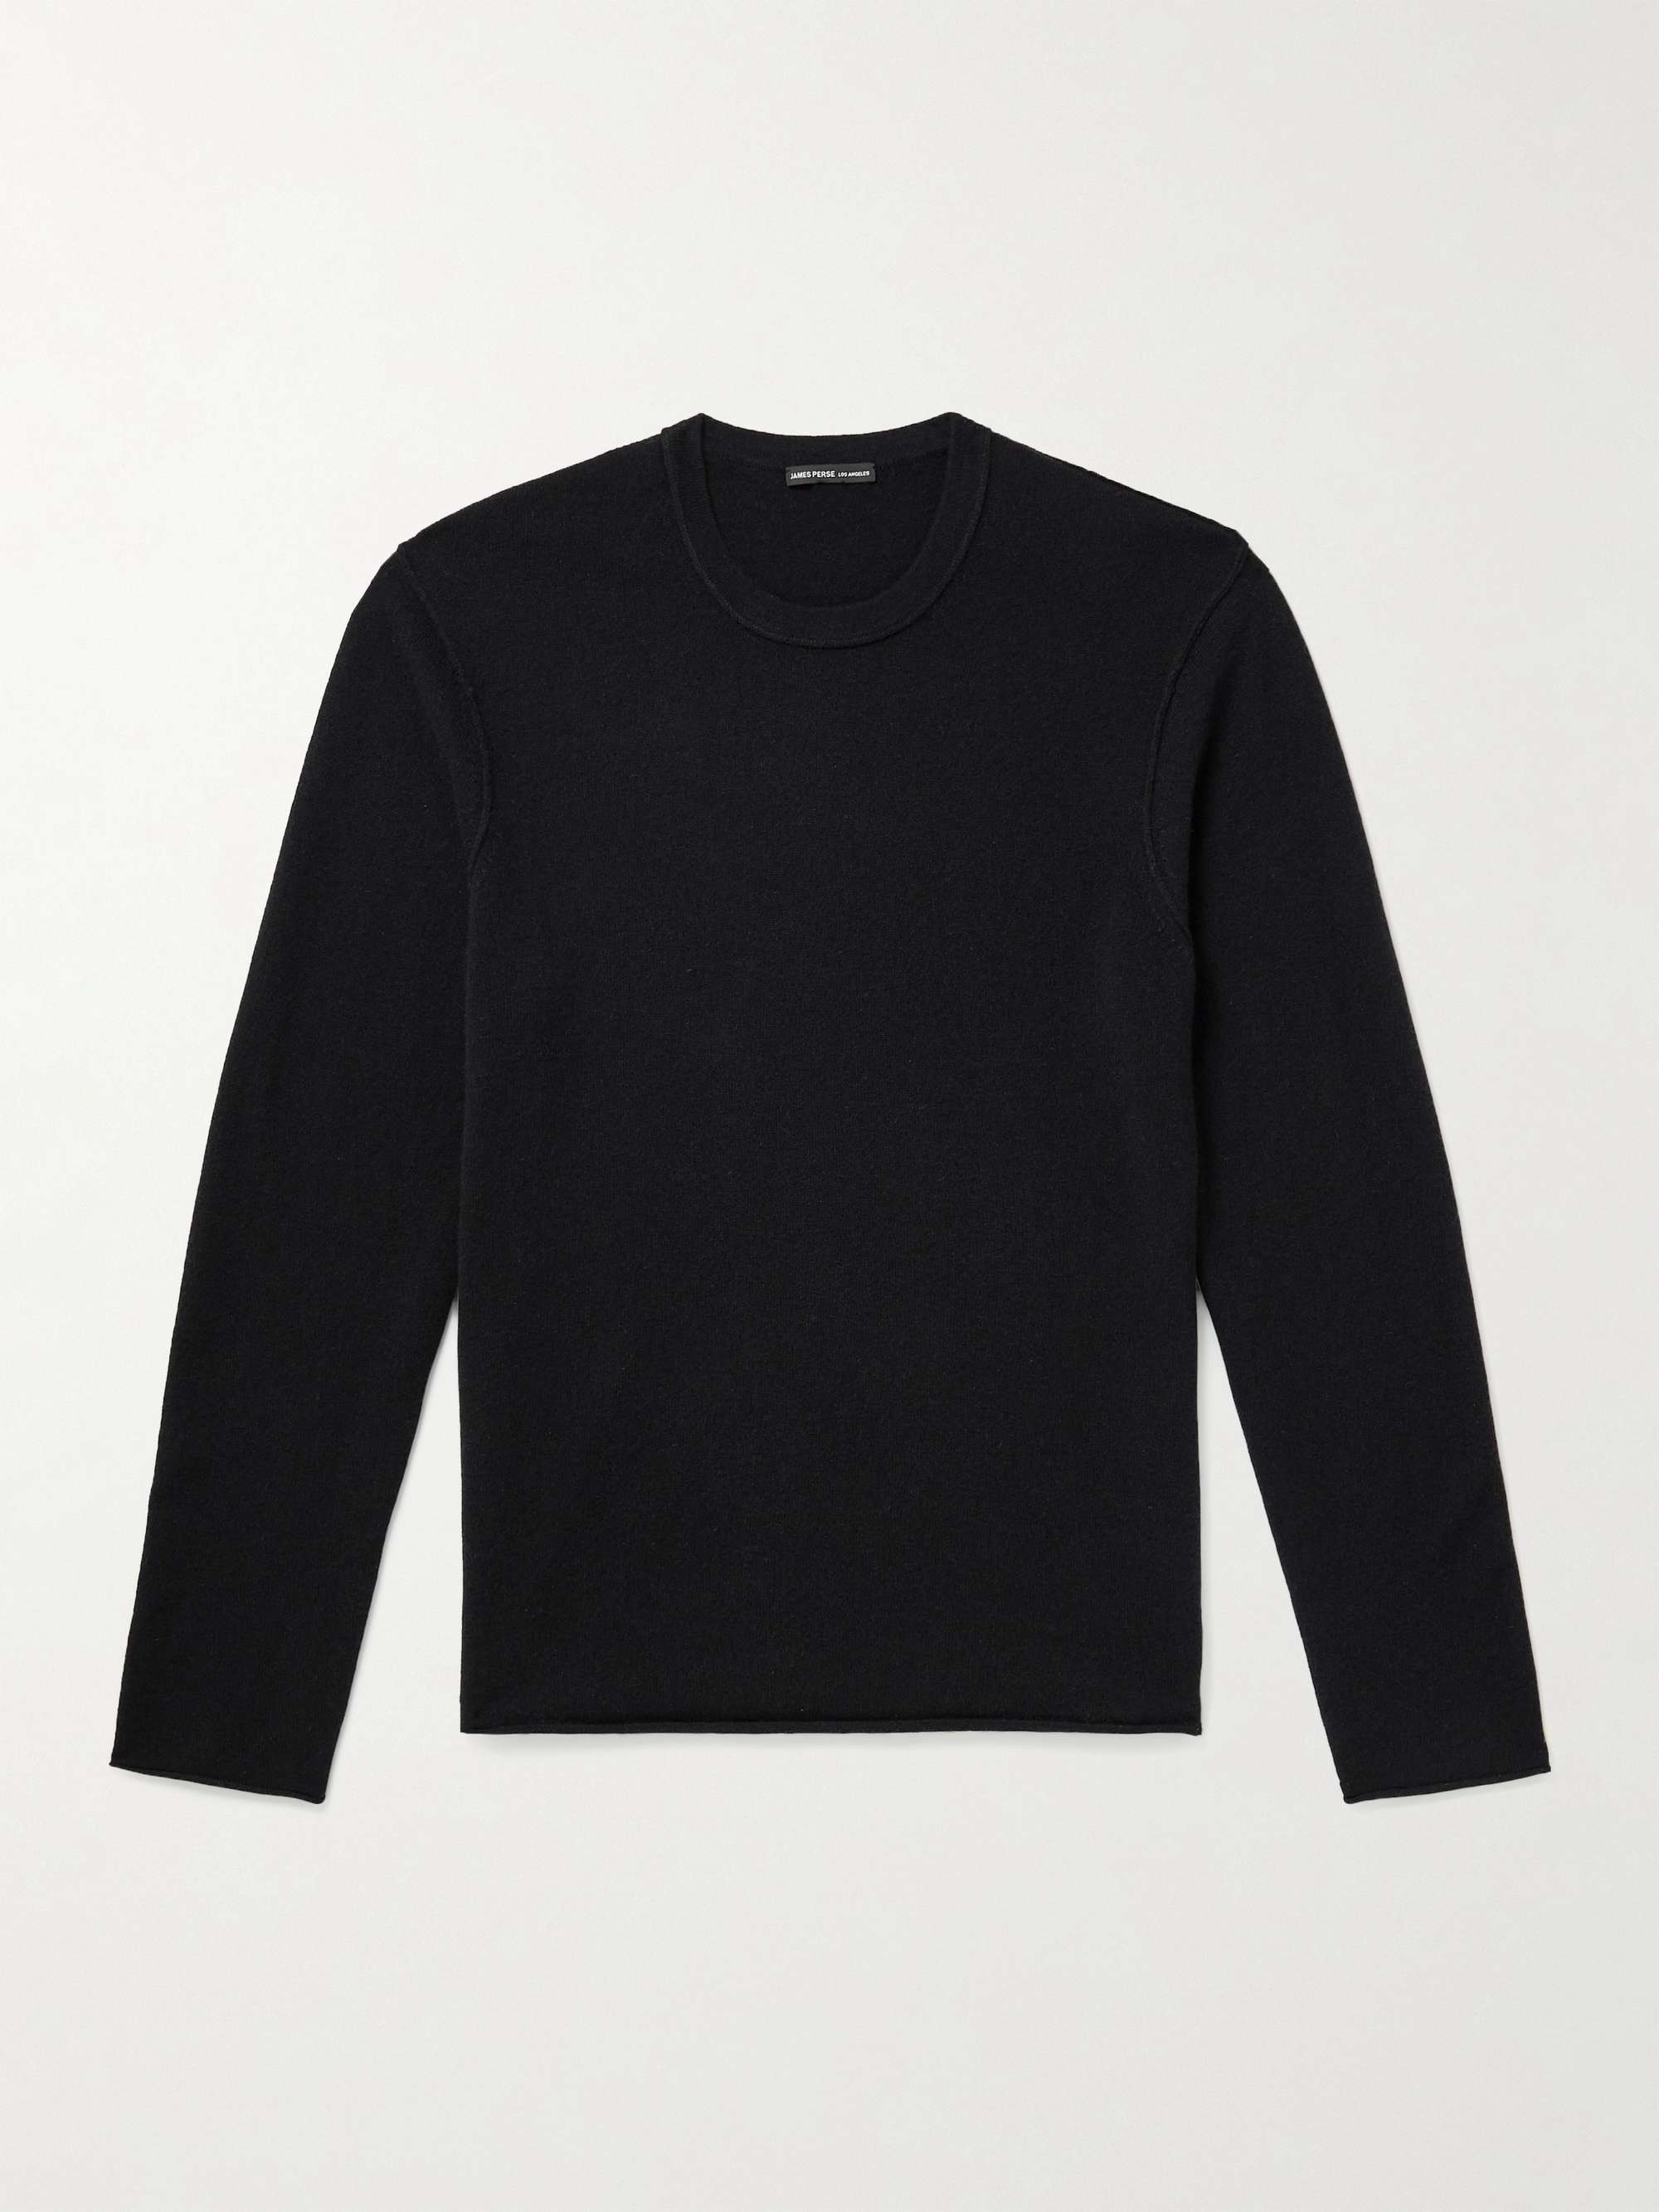 JAMES PERSE Recycled Cashmere Sweater